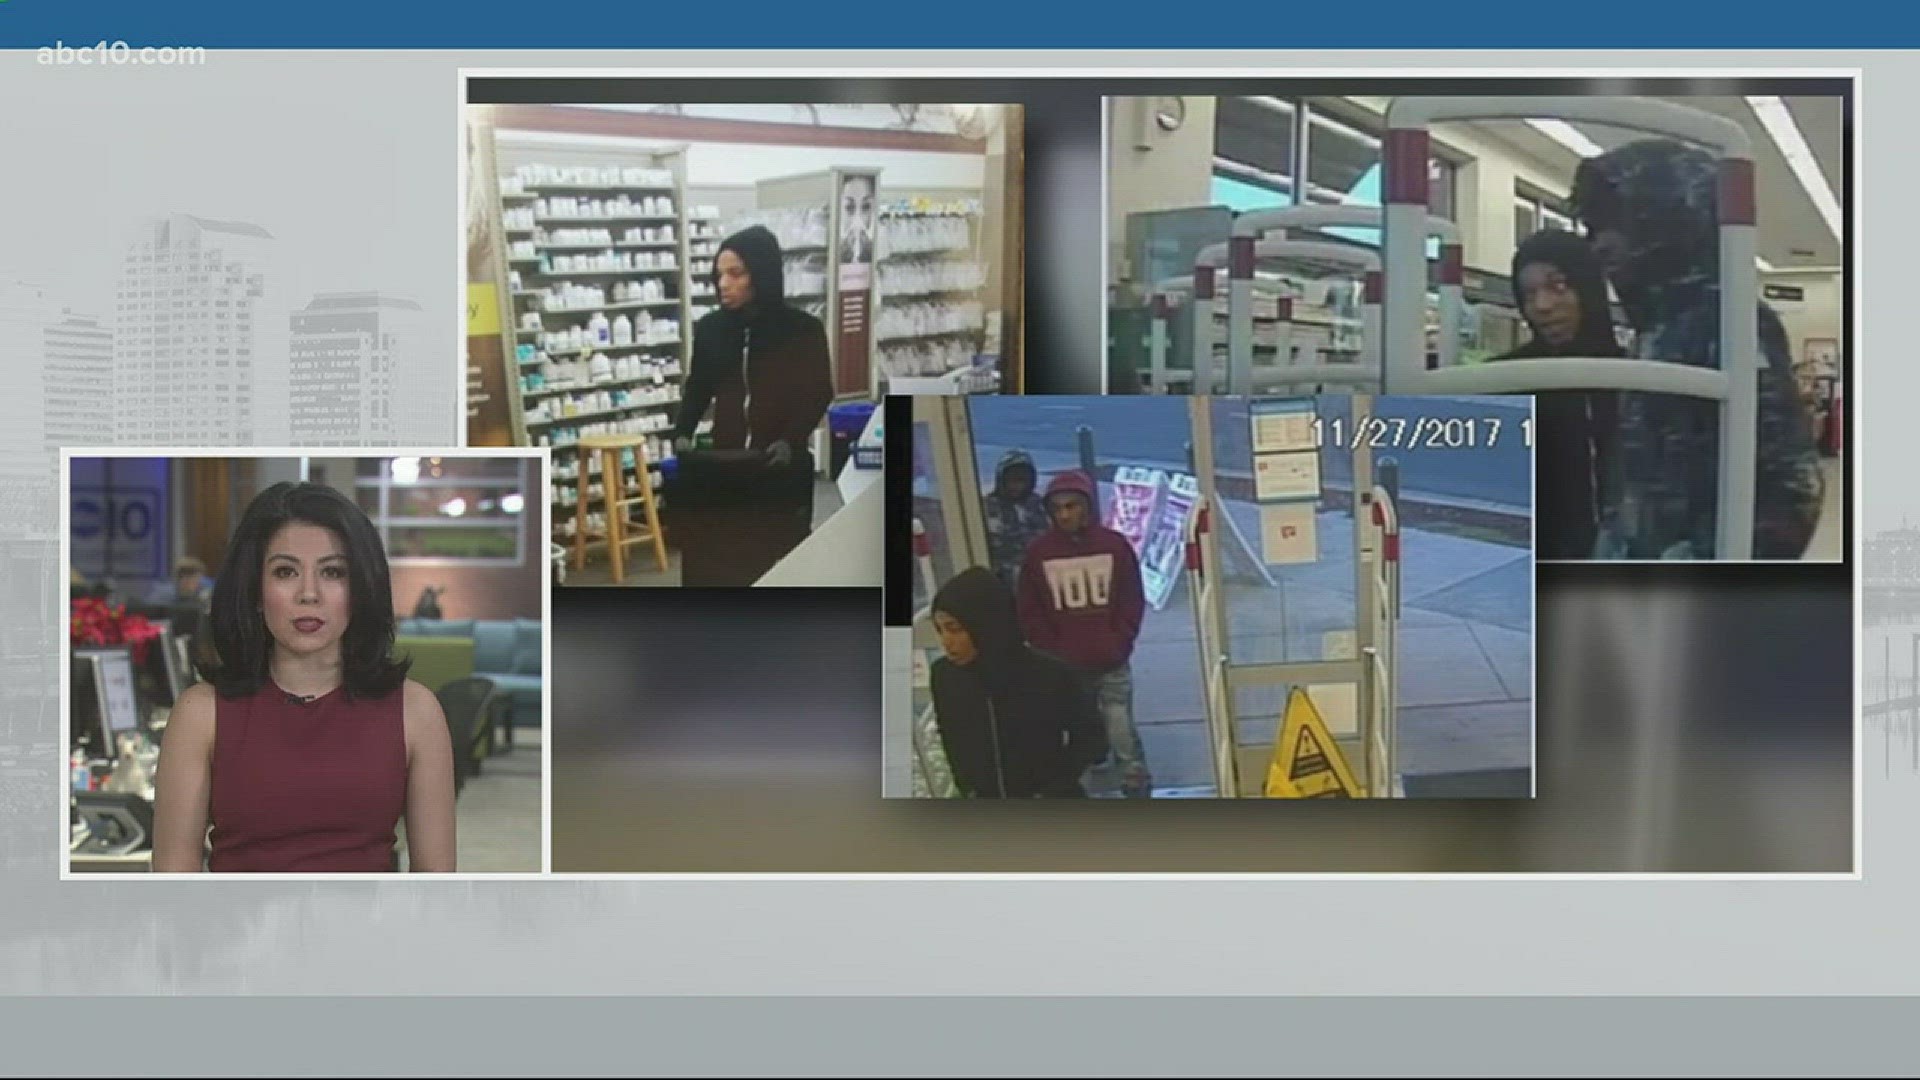 According to Citrus Heights Police, the elderly woman who was knocked unconscious during a pharmacy robbery has passed away.